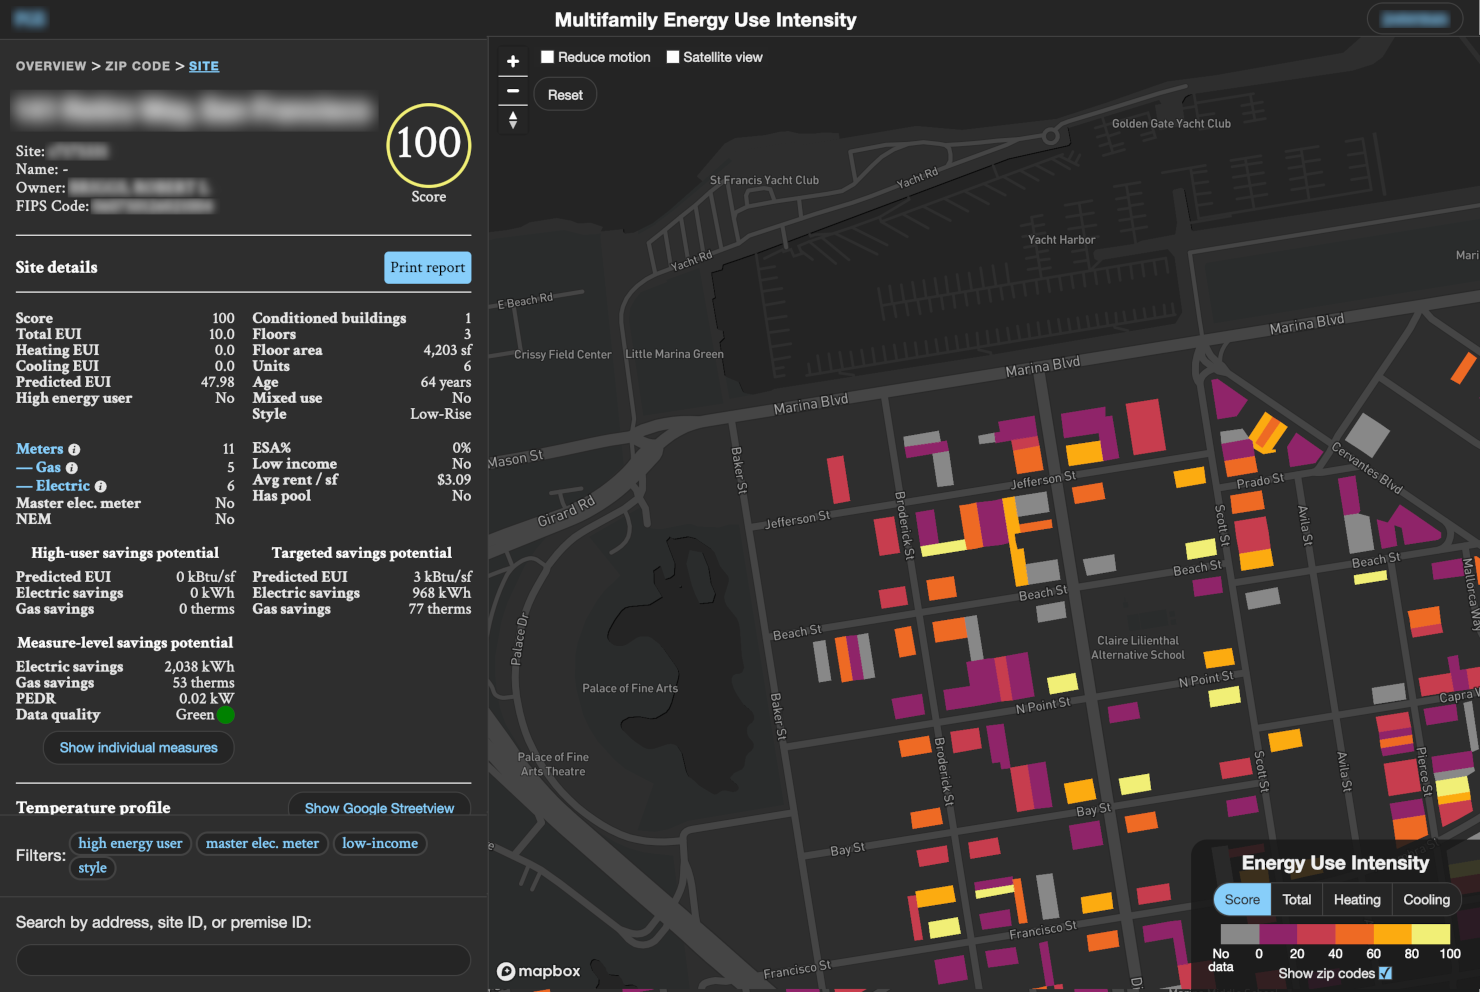 Data visualization on dark background with yellows, oranges, and purples signifying values. Left side is a data dashboard showing the energy use intensity metrics for a site in San Francisco. On the right is a map with color-coded buildings.